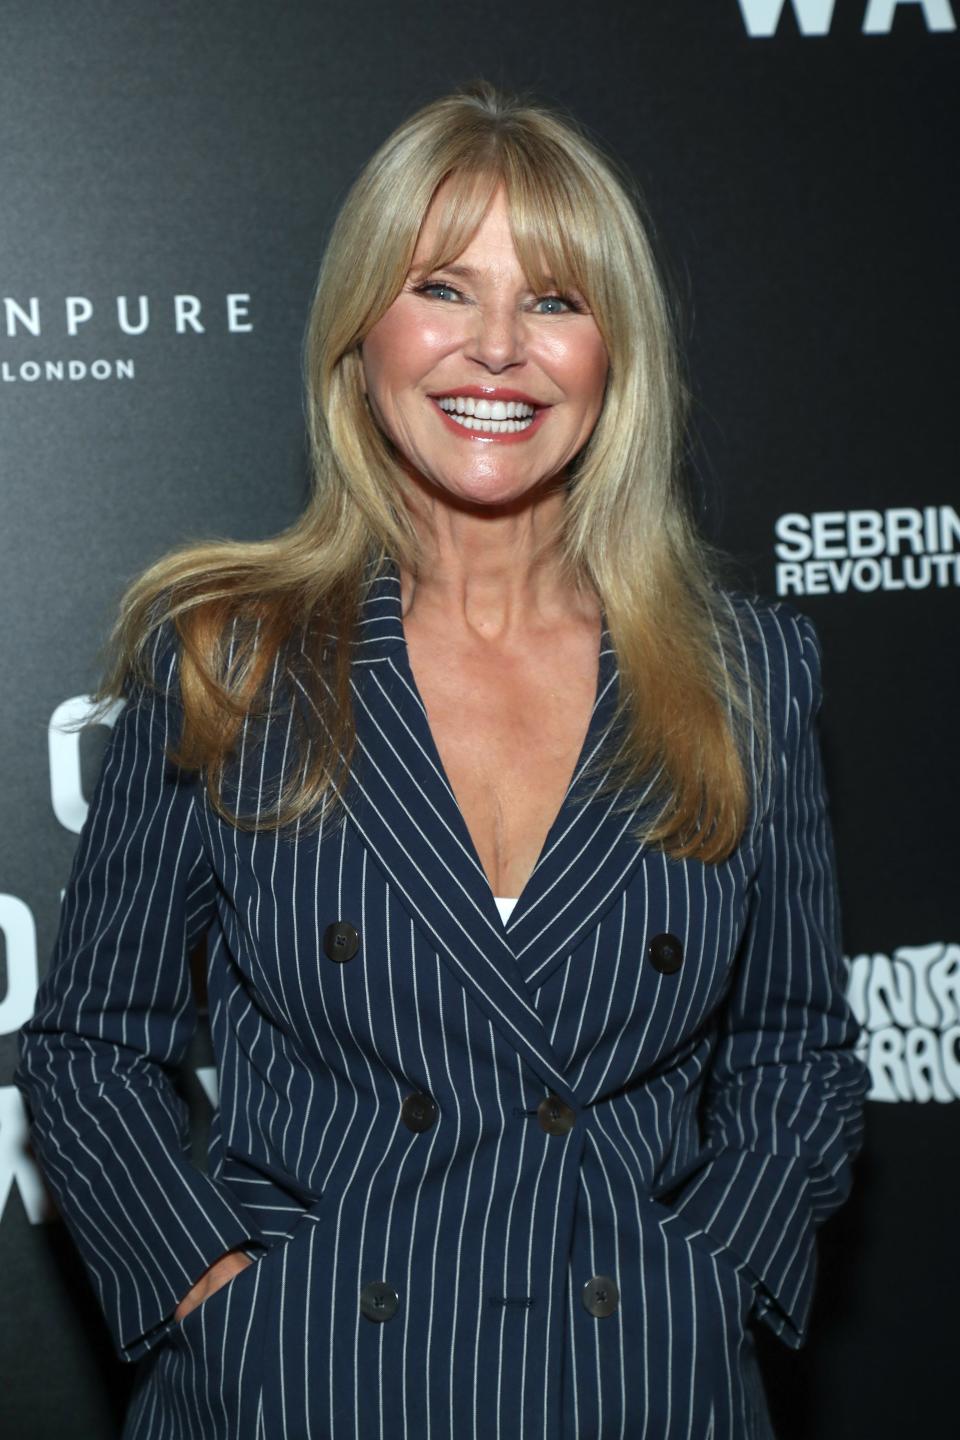 Christie Brinkley opened up about her skin cancer scare in an Instagram post Wednesday, encouraging fans to be "diligent with your sun protection."